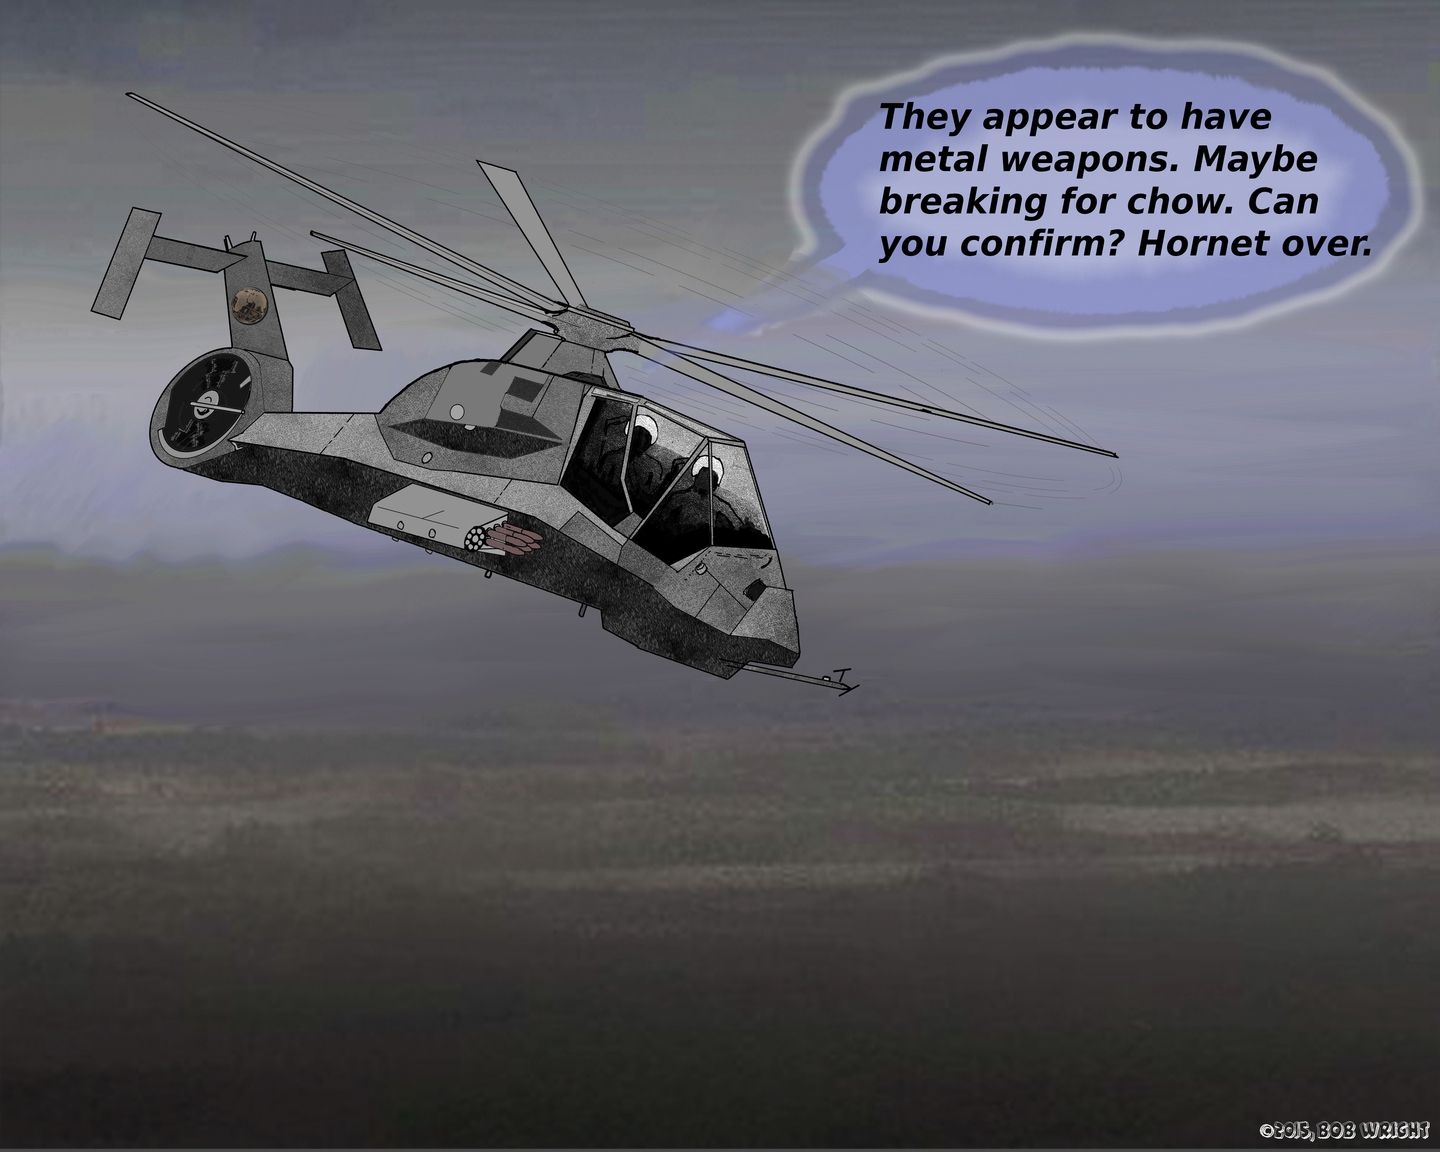 Hornet with radio text, "They appear to have metal weapons. Maybe breaking for chow. Cany you confirm? Hornet over."